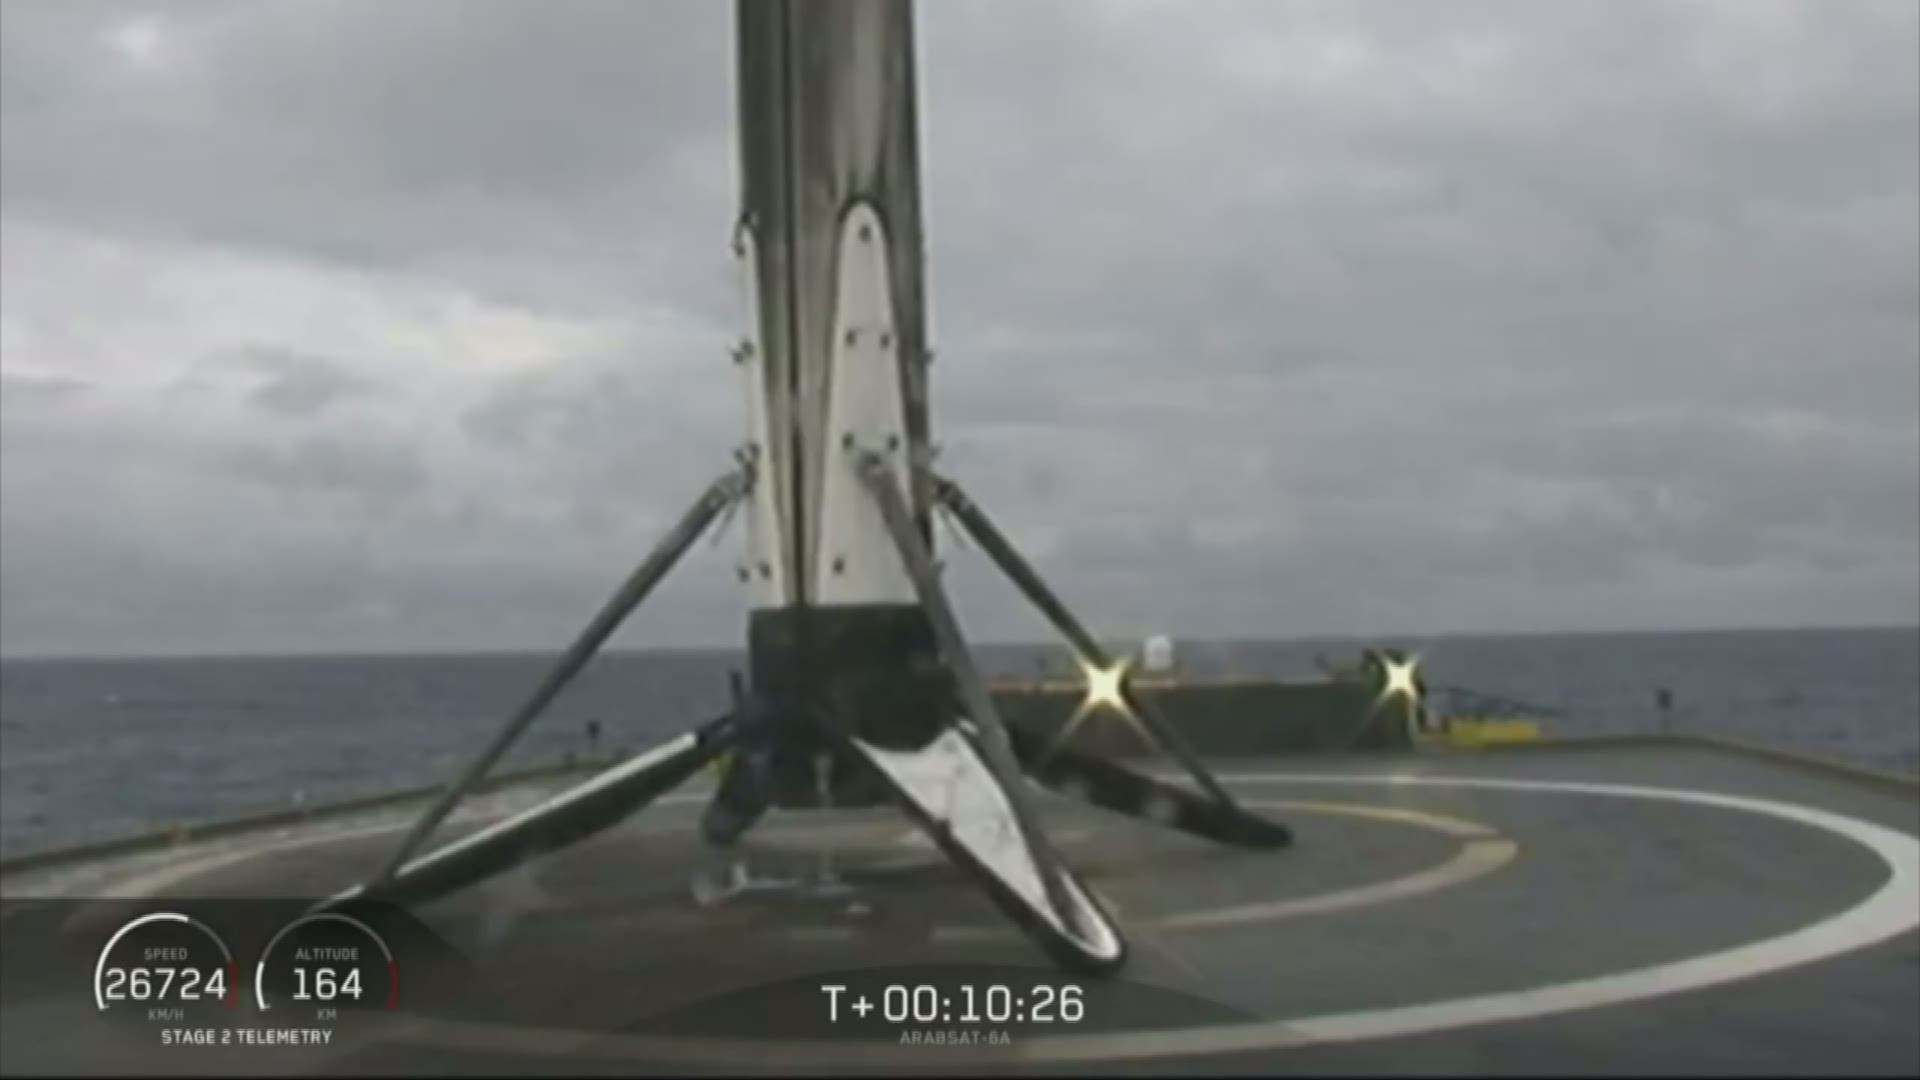 For the first time ever, SpaceX successfully landed all three of its Falcon Heavy rockets after launch. (Courtesy: SpaceX)